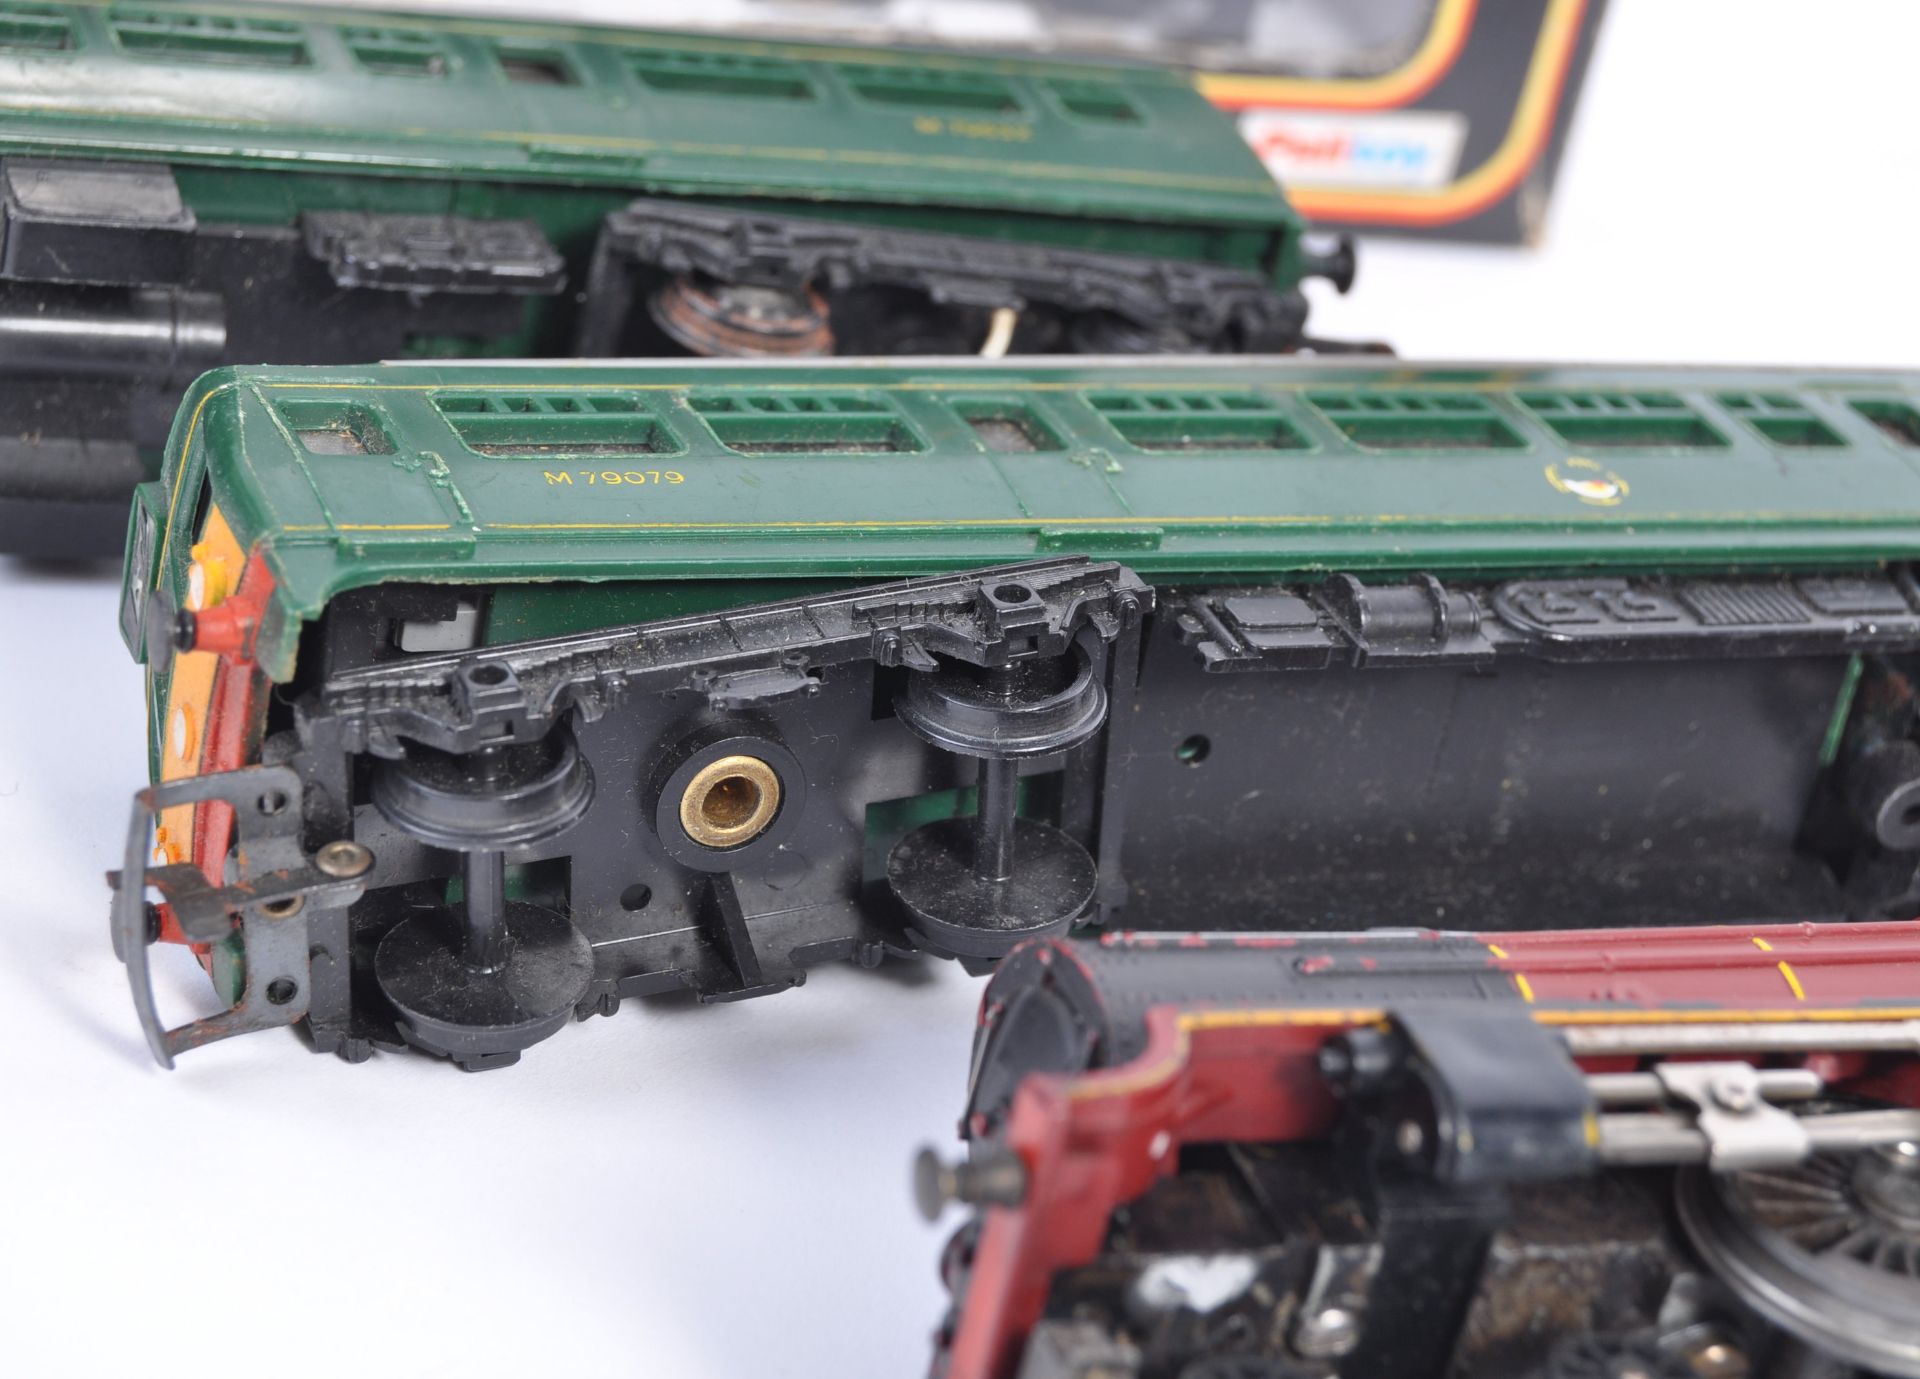 COLLECTION OF HORNBY AND MAINLINE PALITOY 00 GAUGE RAIL LOCOMOTIVES - Bild 8 aus 9